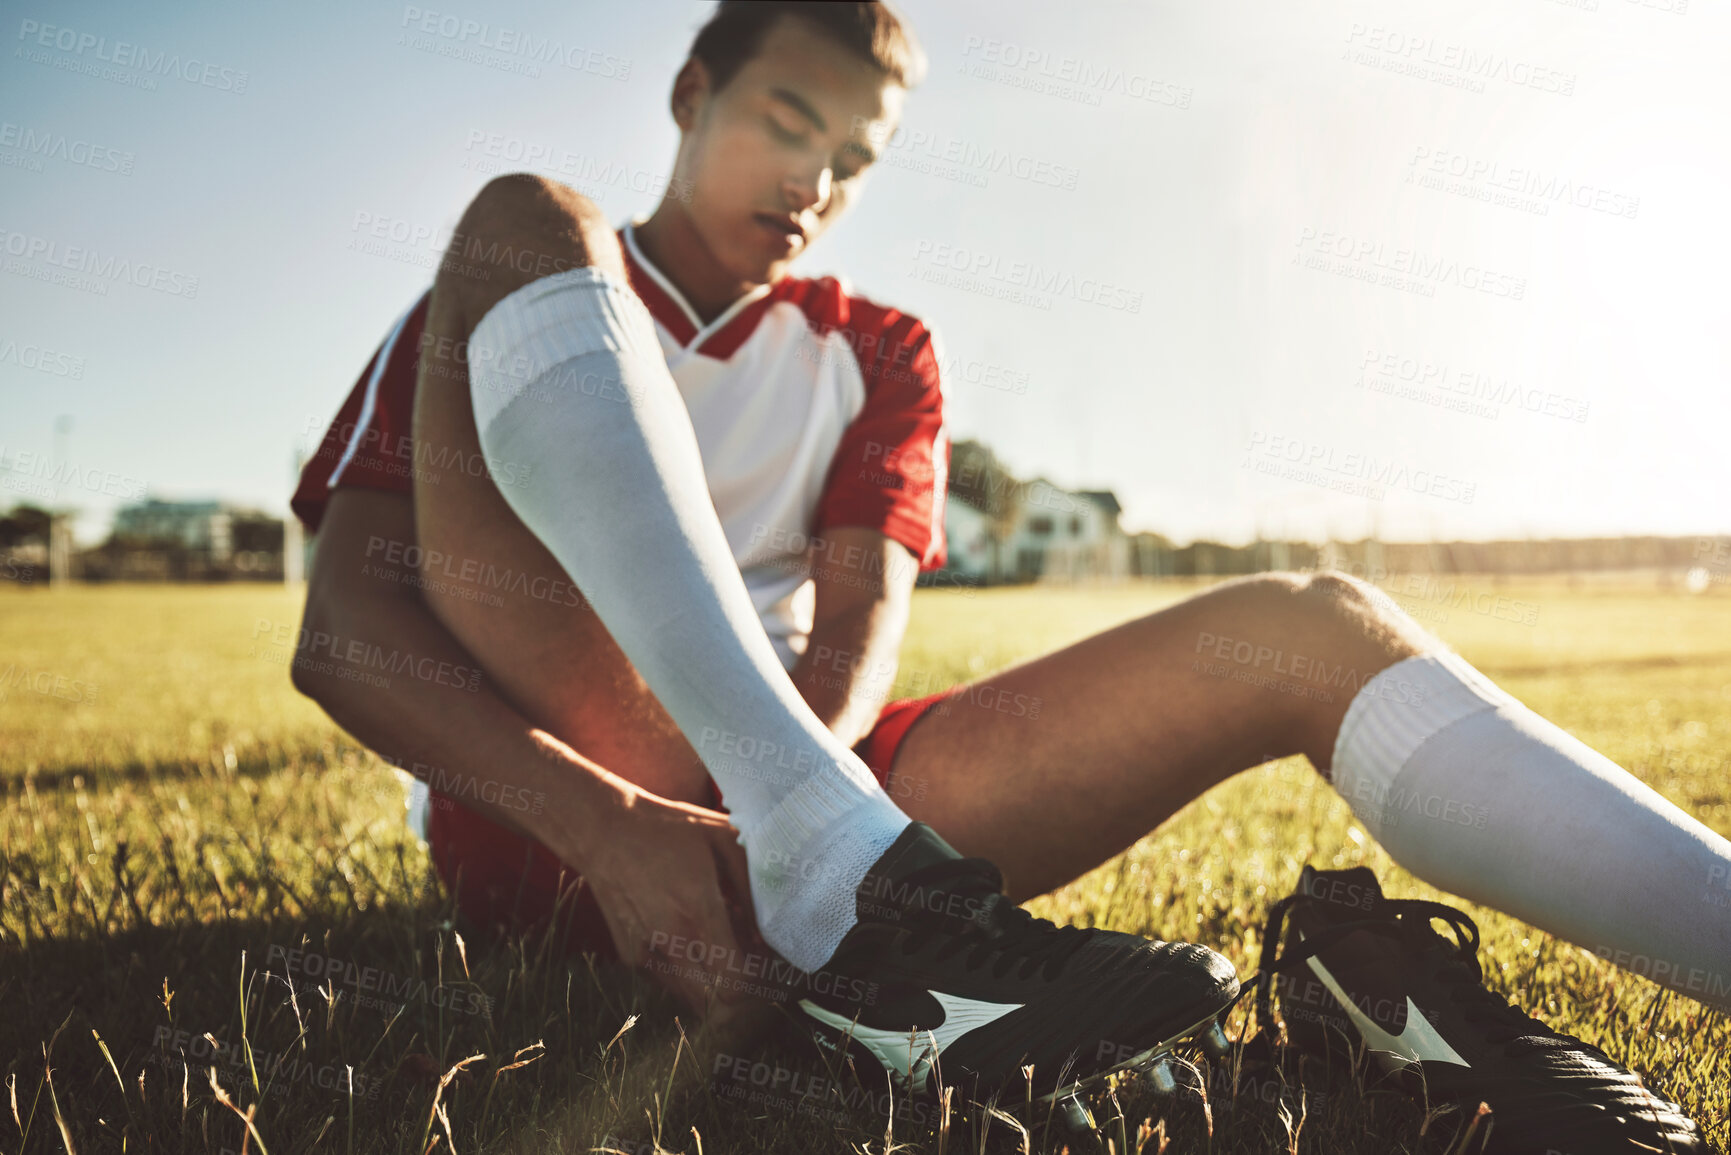 Buy stock photo Football, shoes and soccer player about to start fitness training, cardio workout and exercise on sports field. Athlete, Brazil and young man tying boots or footwear laces to get ready for practice